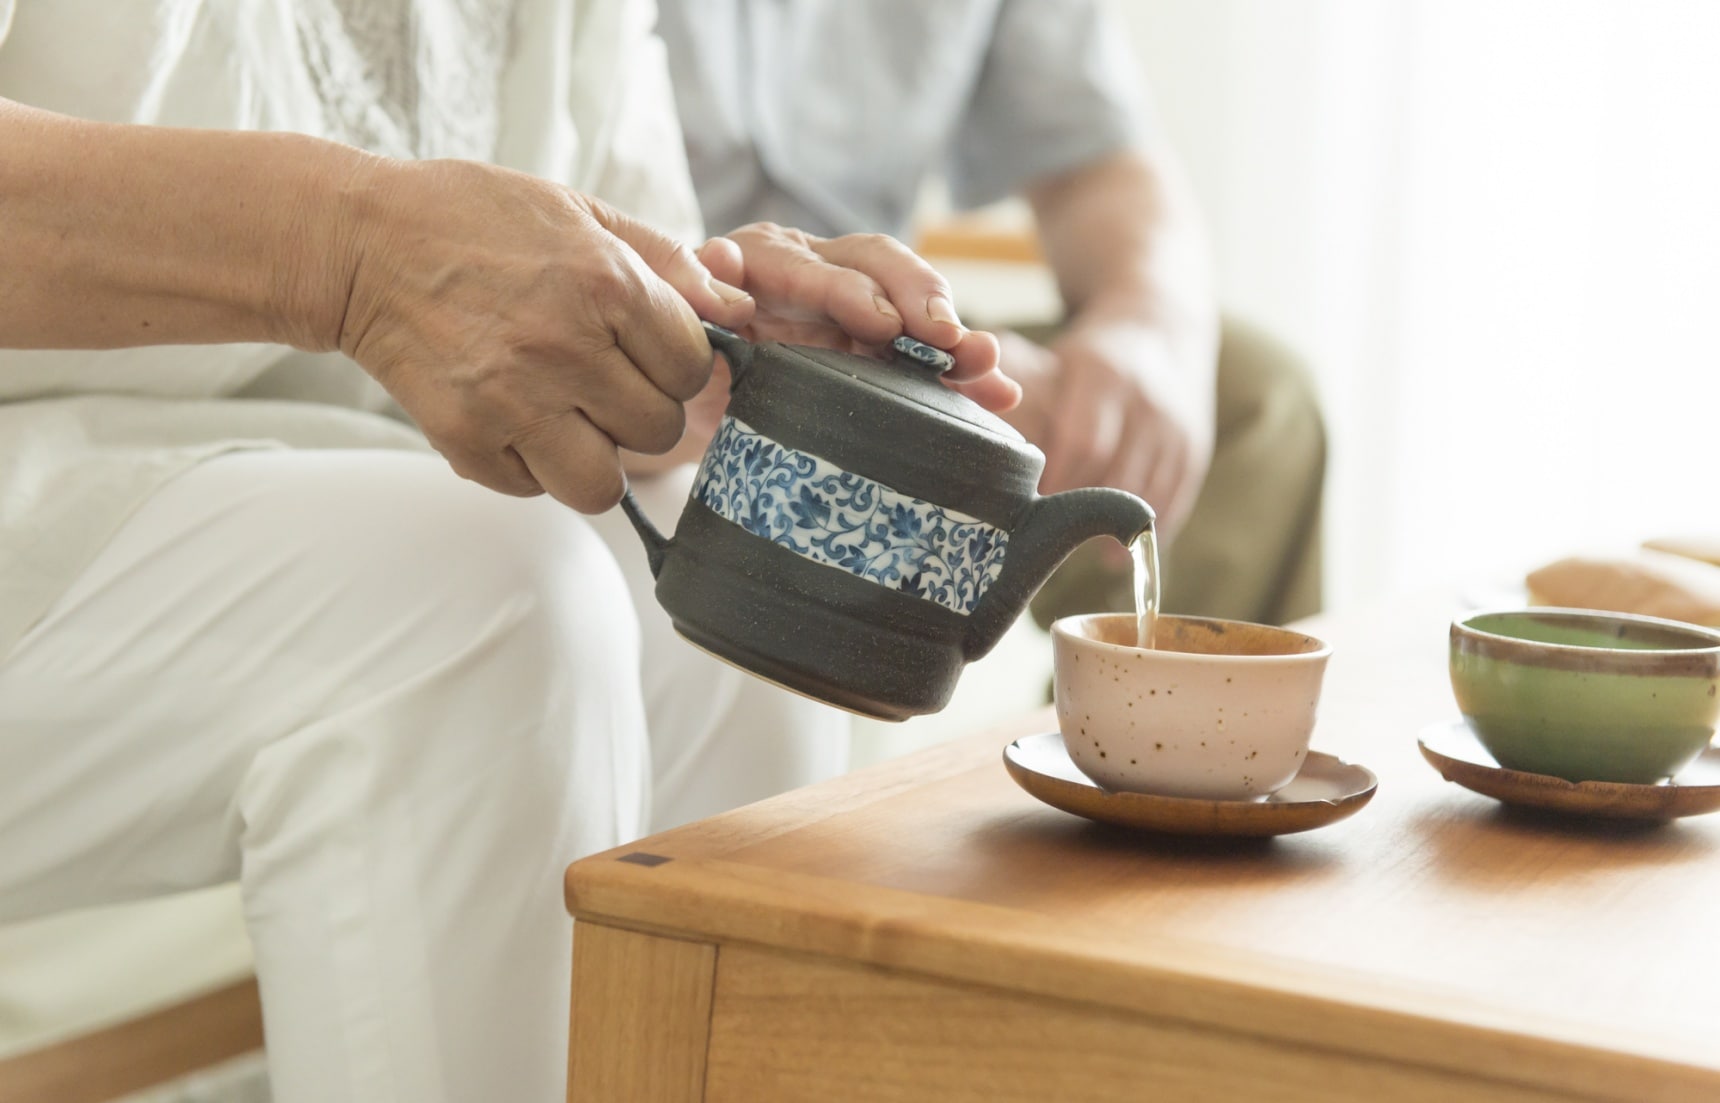 The Polite Way to Sip Green Tea with Company